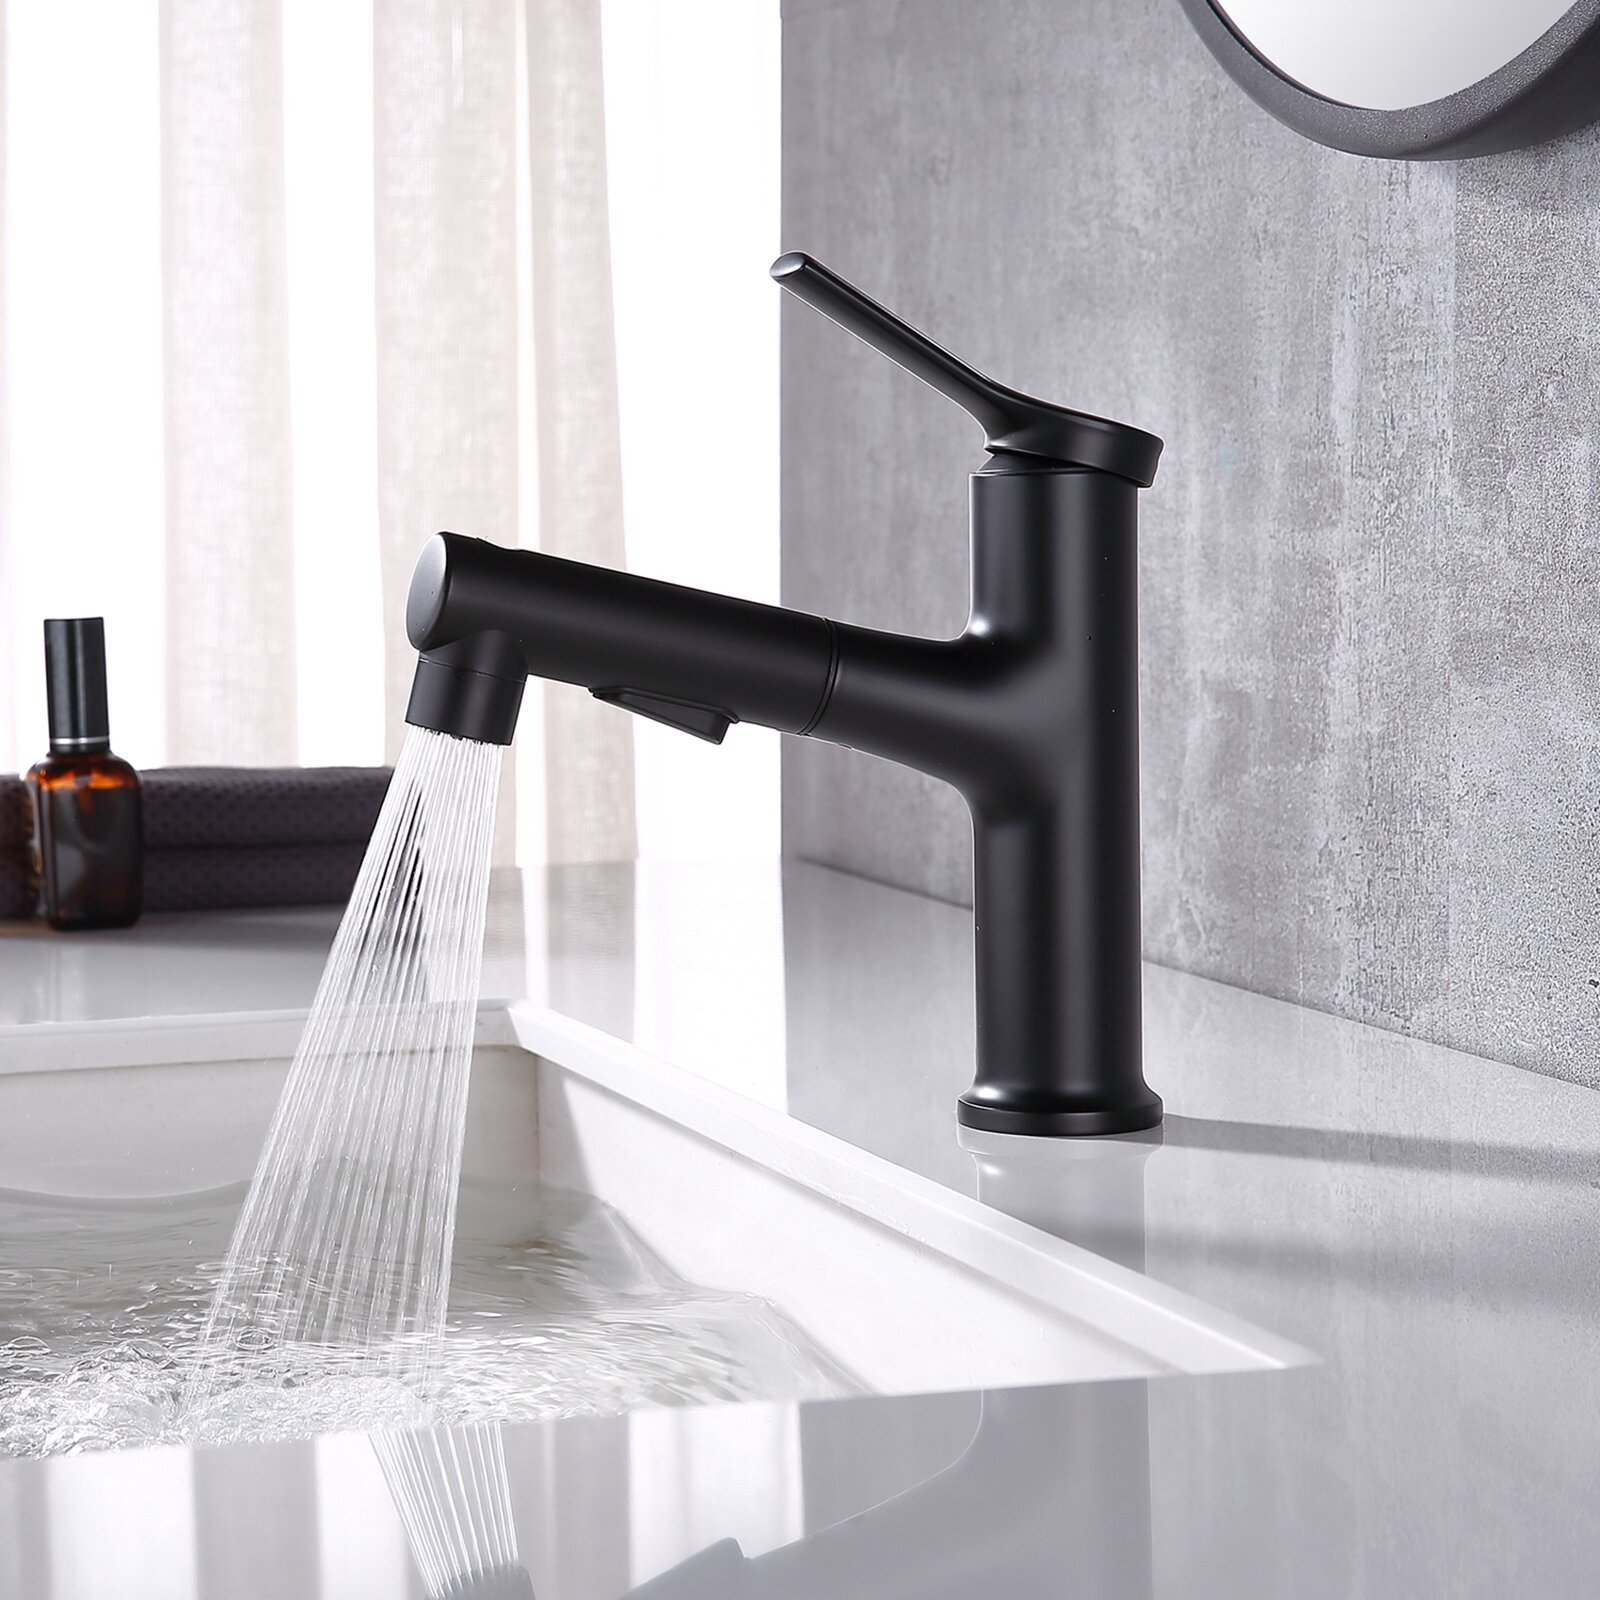 Matte Black Bathroom Faucet Single Hole Bathroom Sink Faucets One Hole Modern Brass Vanity Basin Lavatory Mixter Tap for Restroom RBROHANT RBF65007MB 